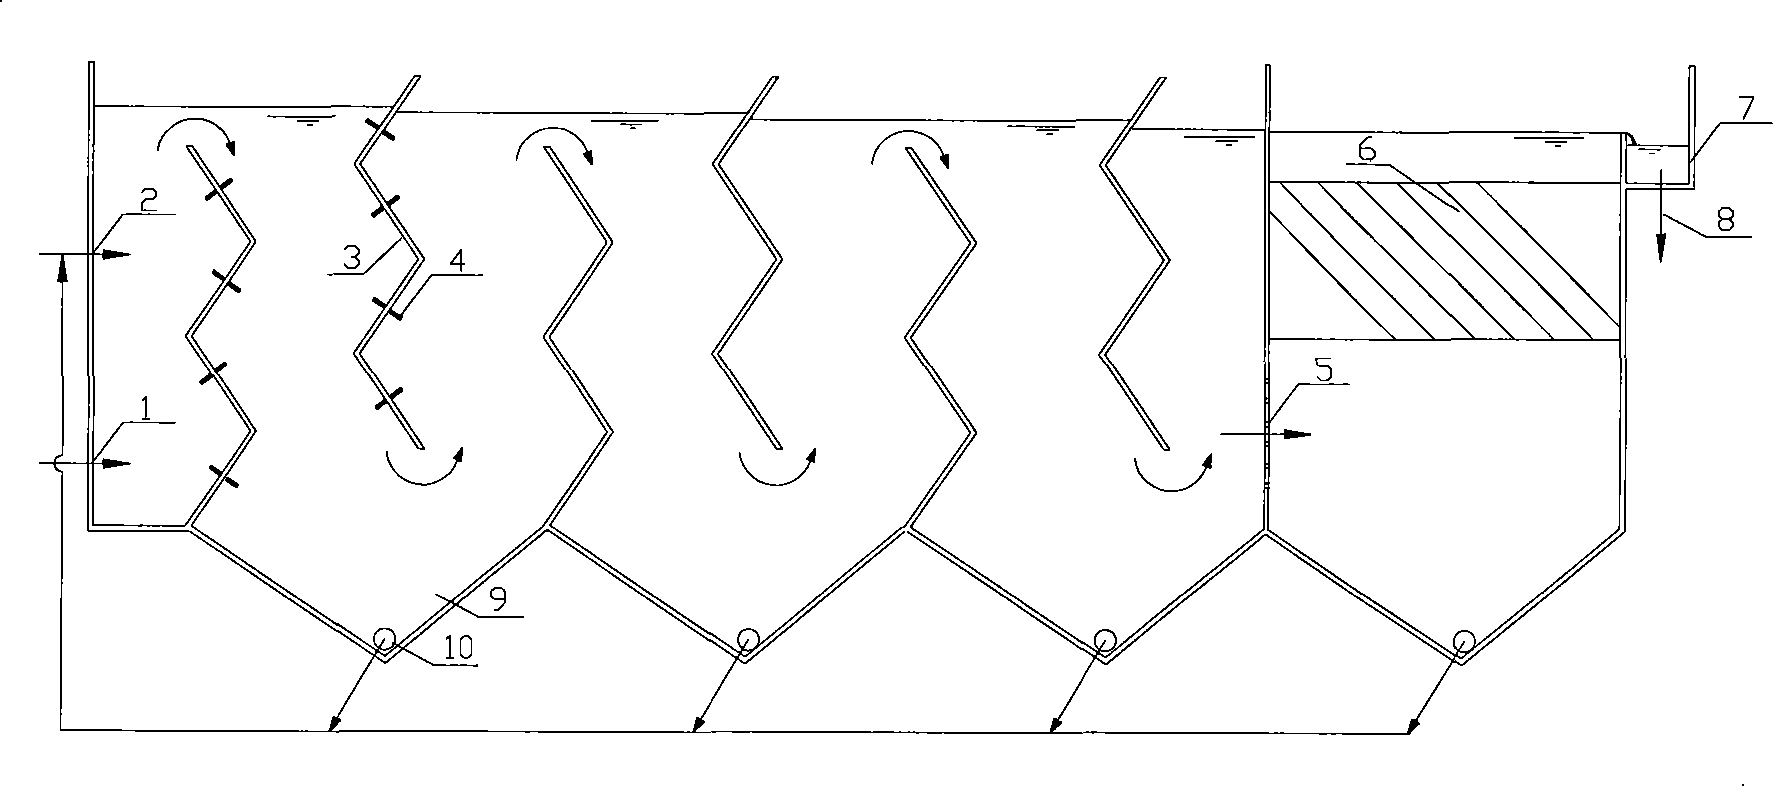 Highly effective composite hydrolytic acidation cell having both sewage treatment and sludge reduction functions